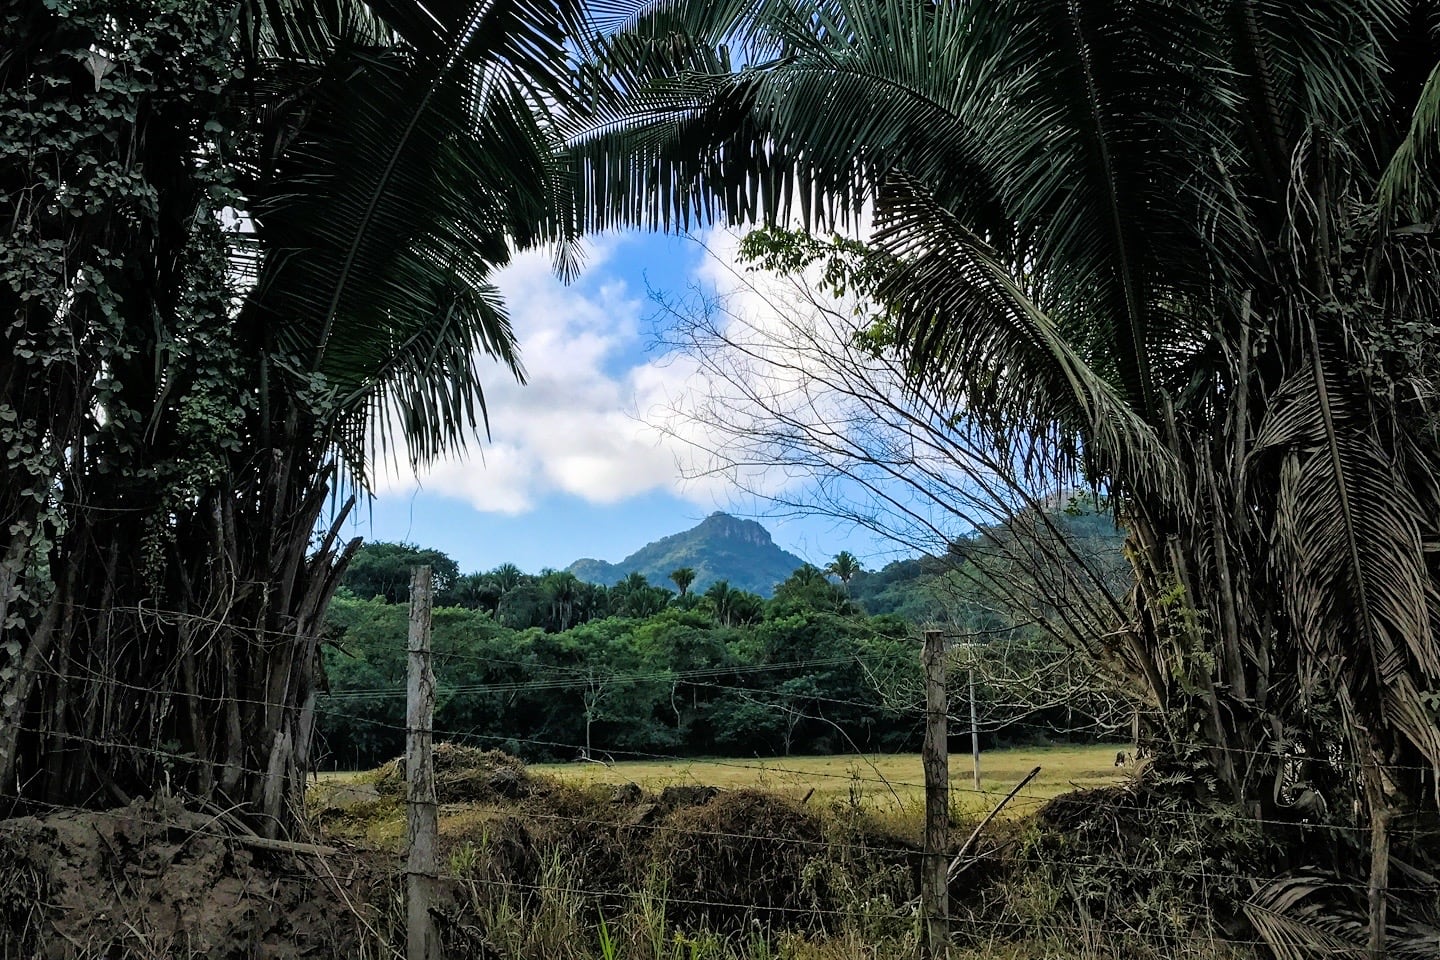 View of Cerro del Mono Monkey Mountain framed by palm trees